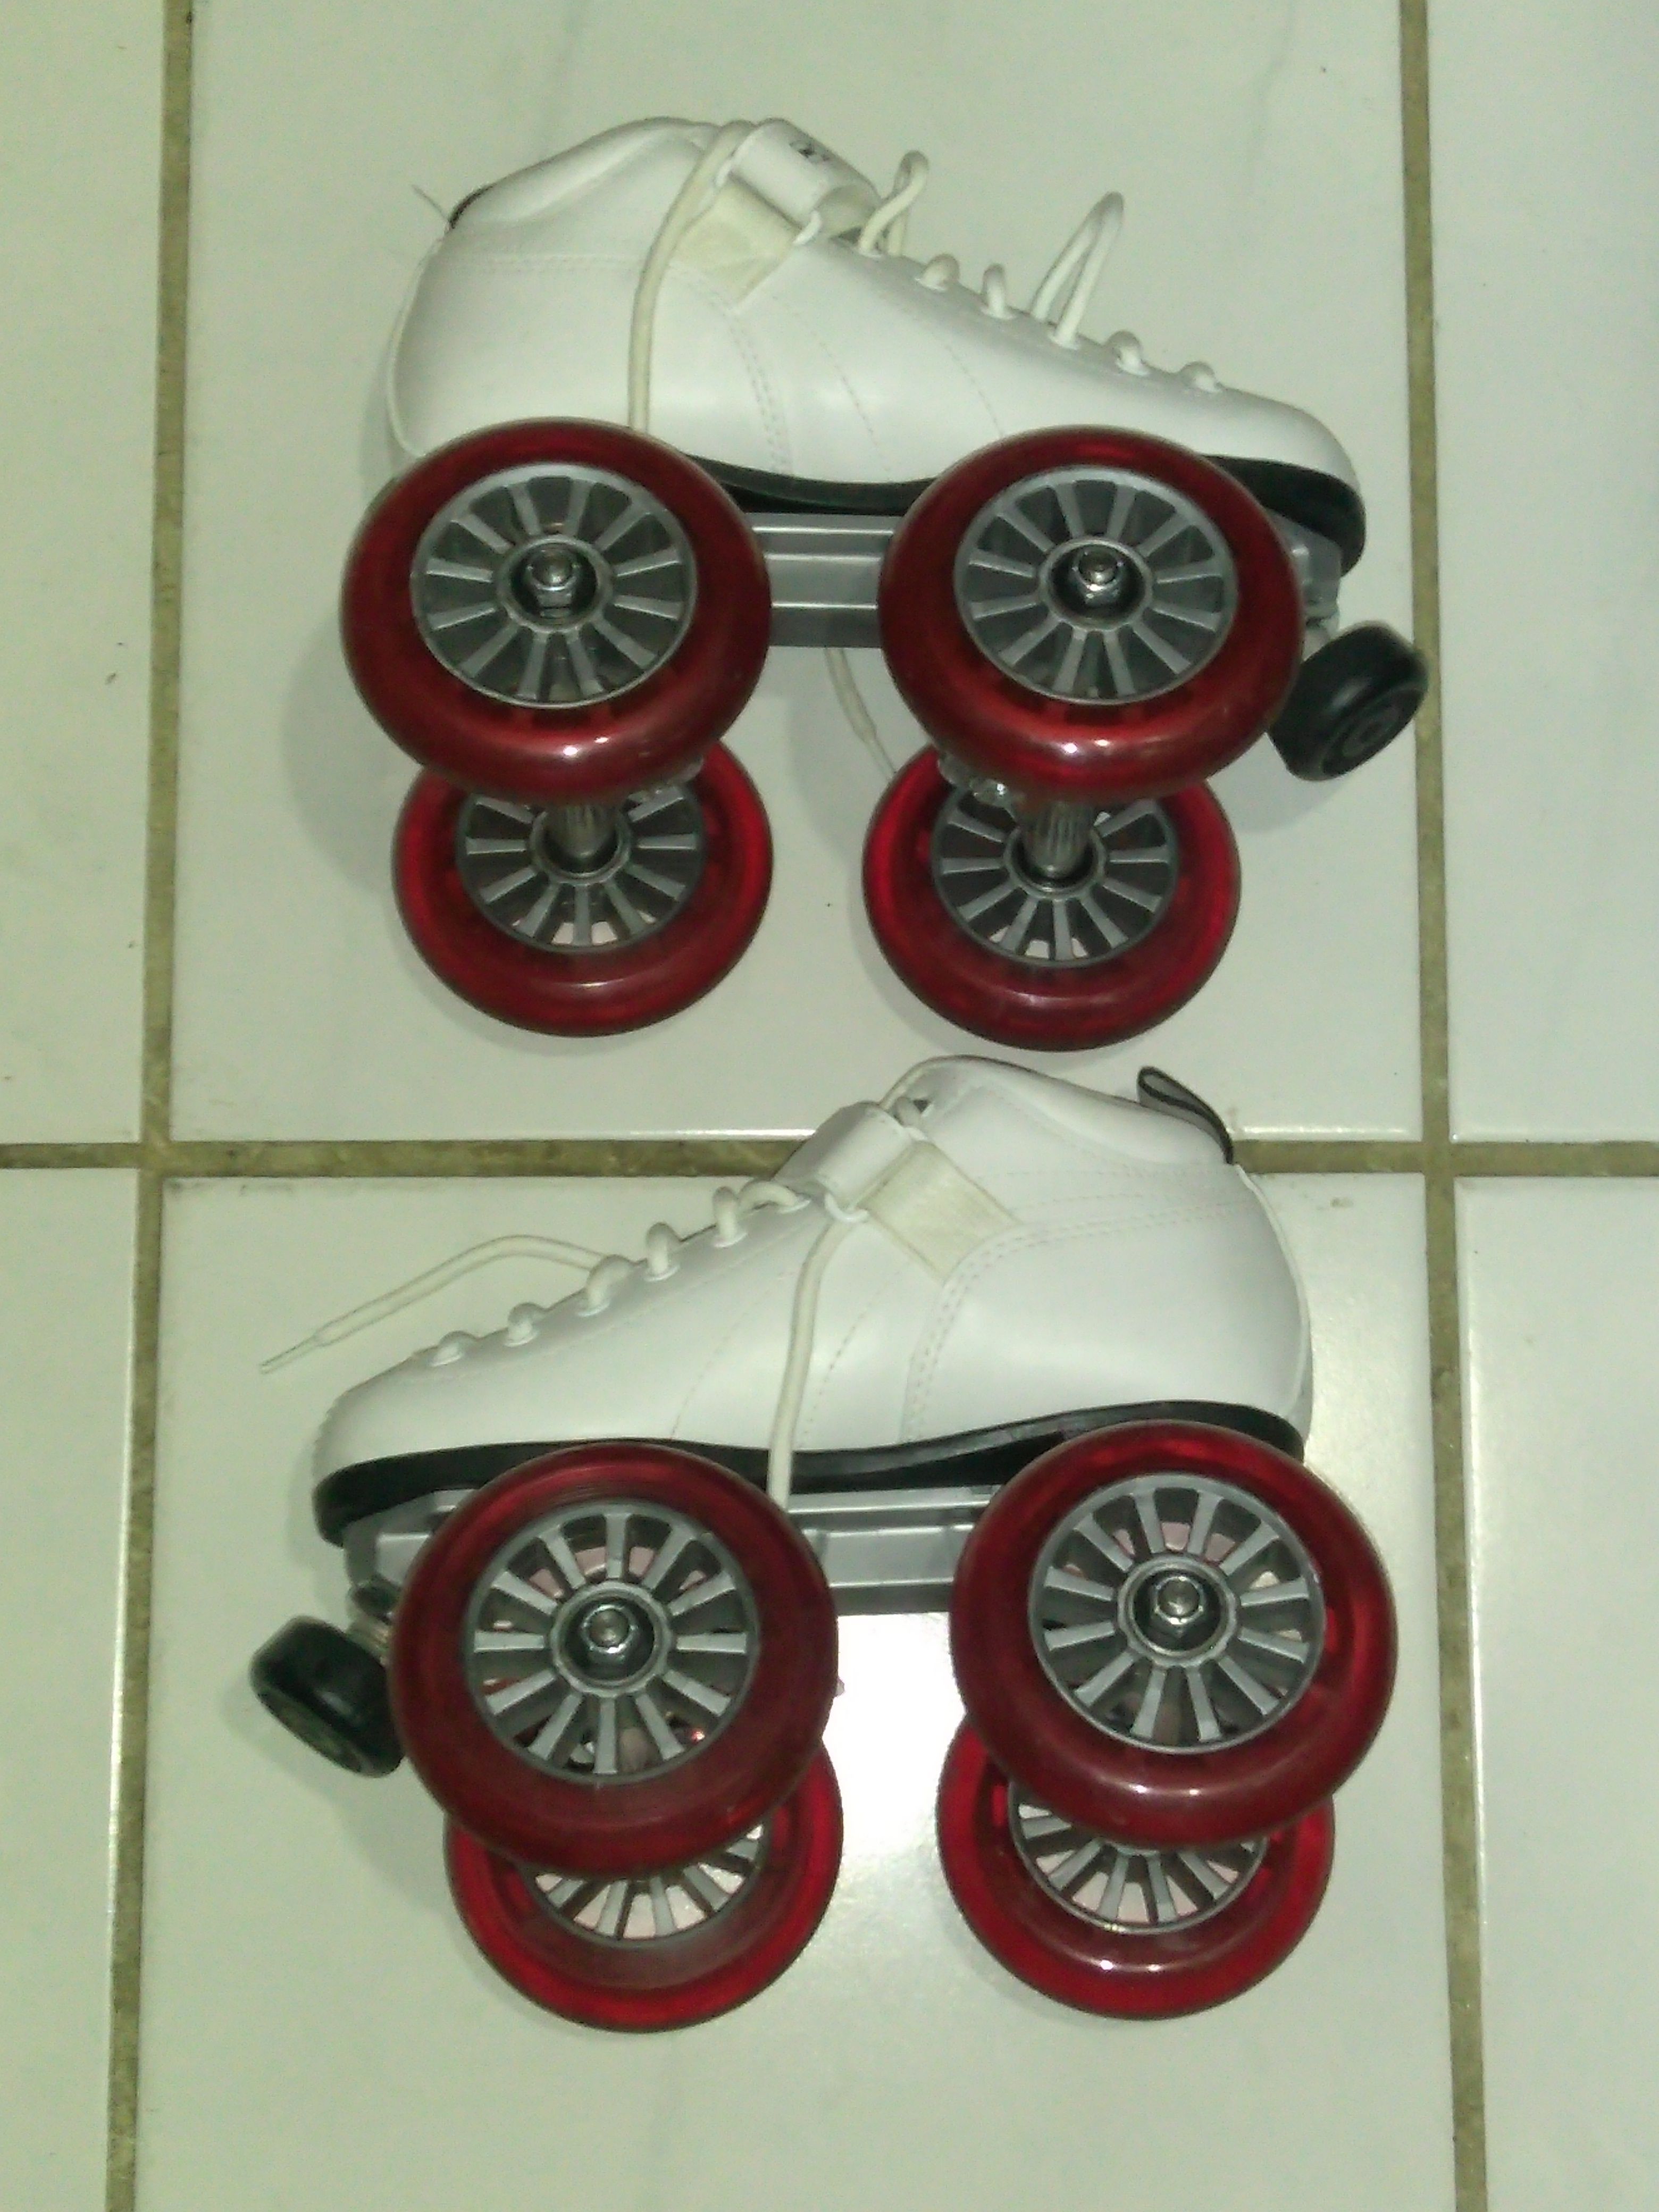 Size 4 Boxer skates with suregrip plates and oversized wheels